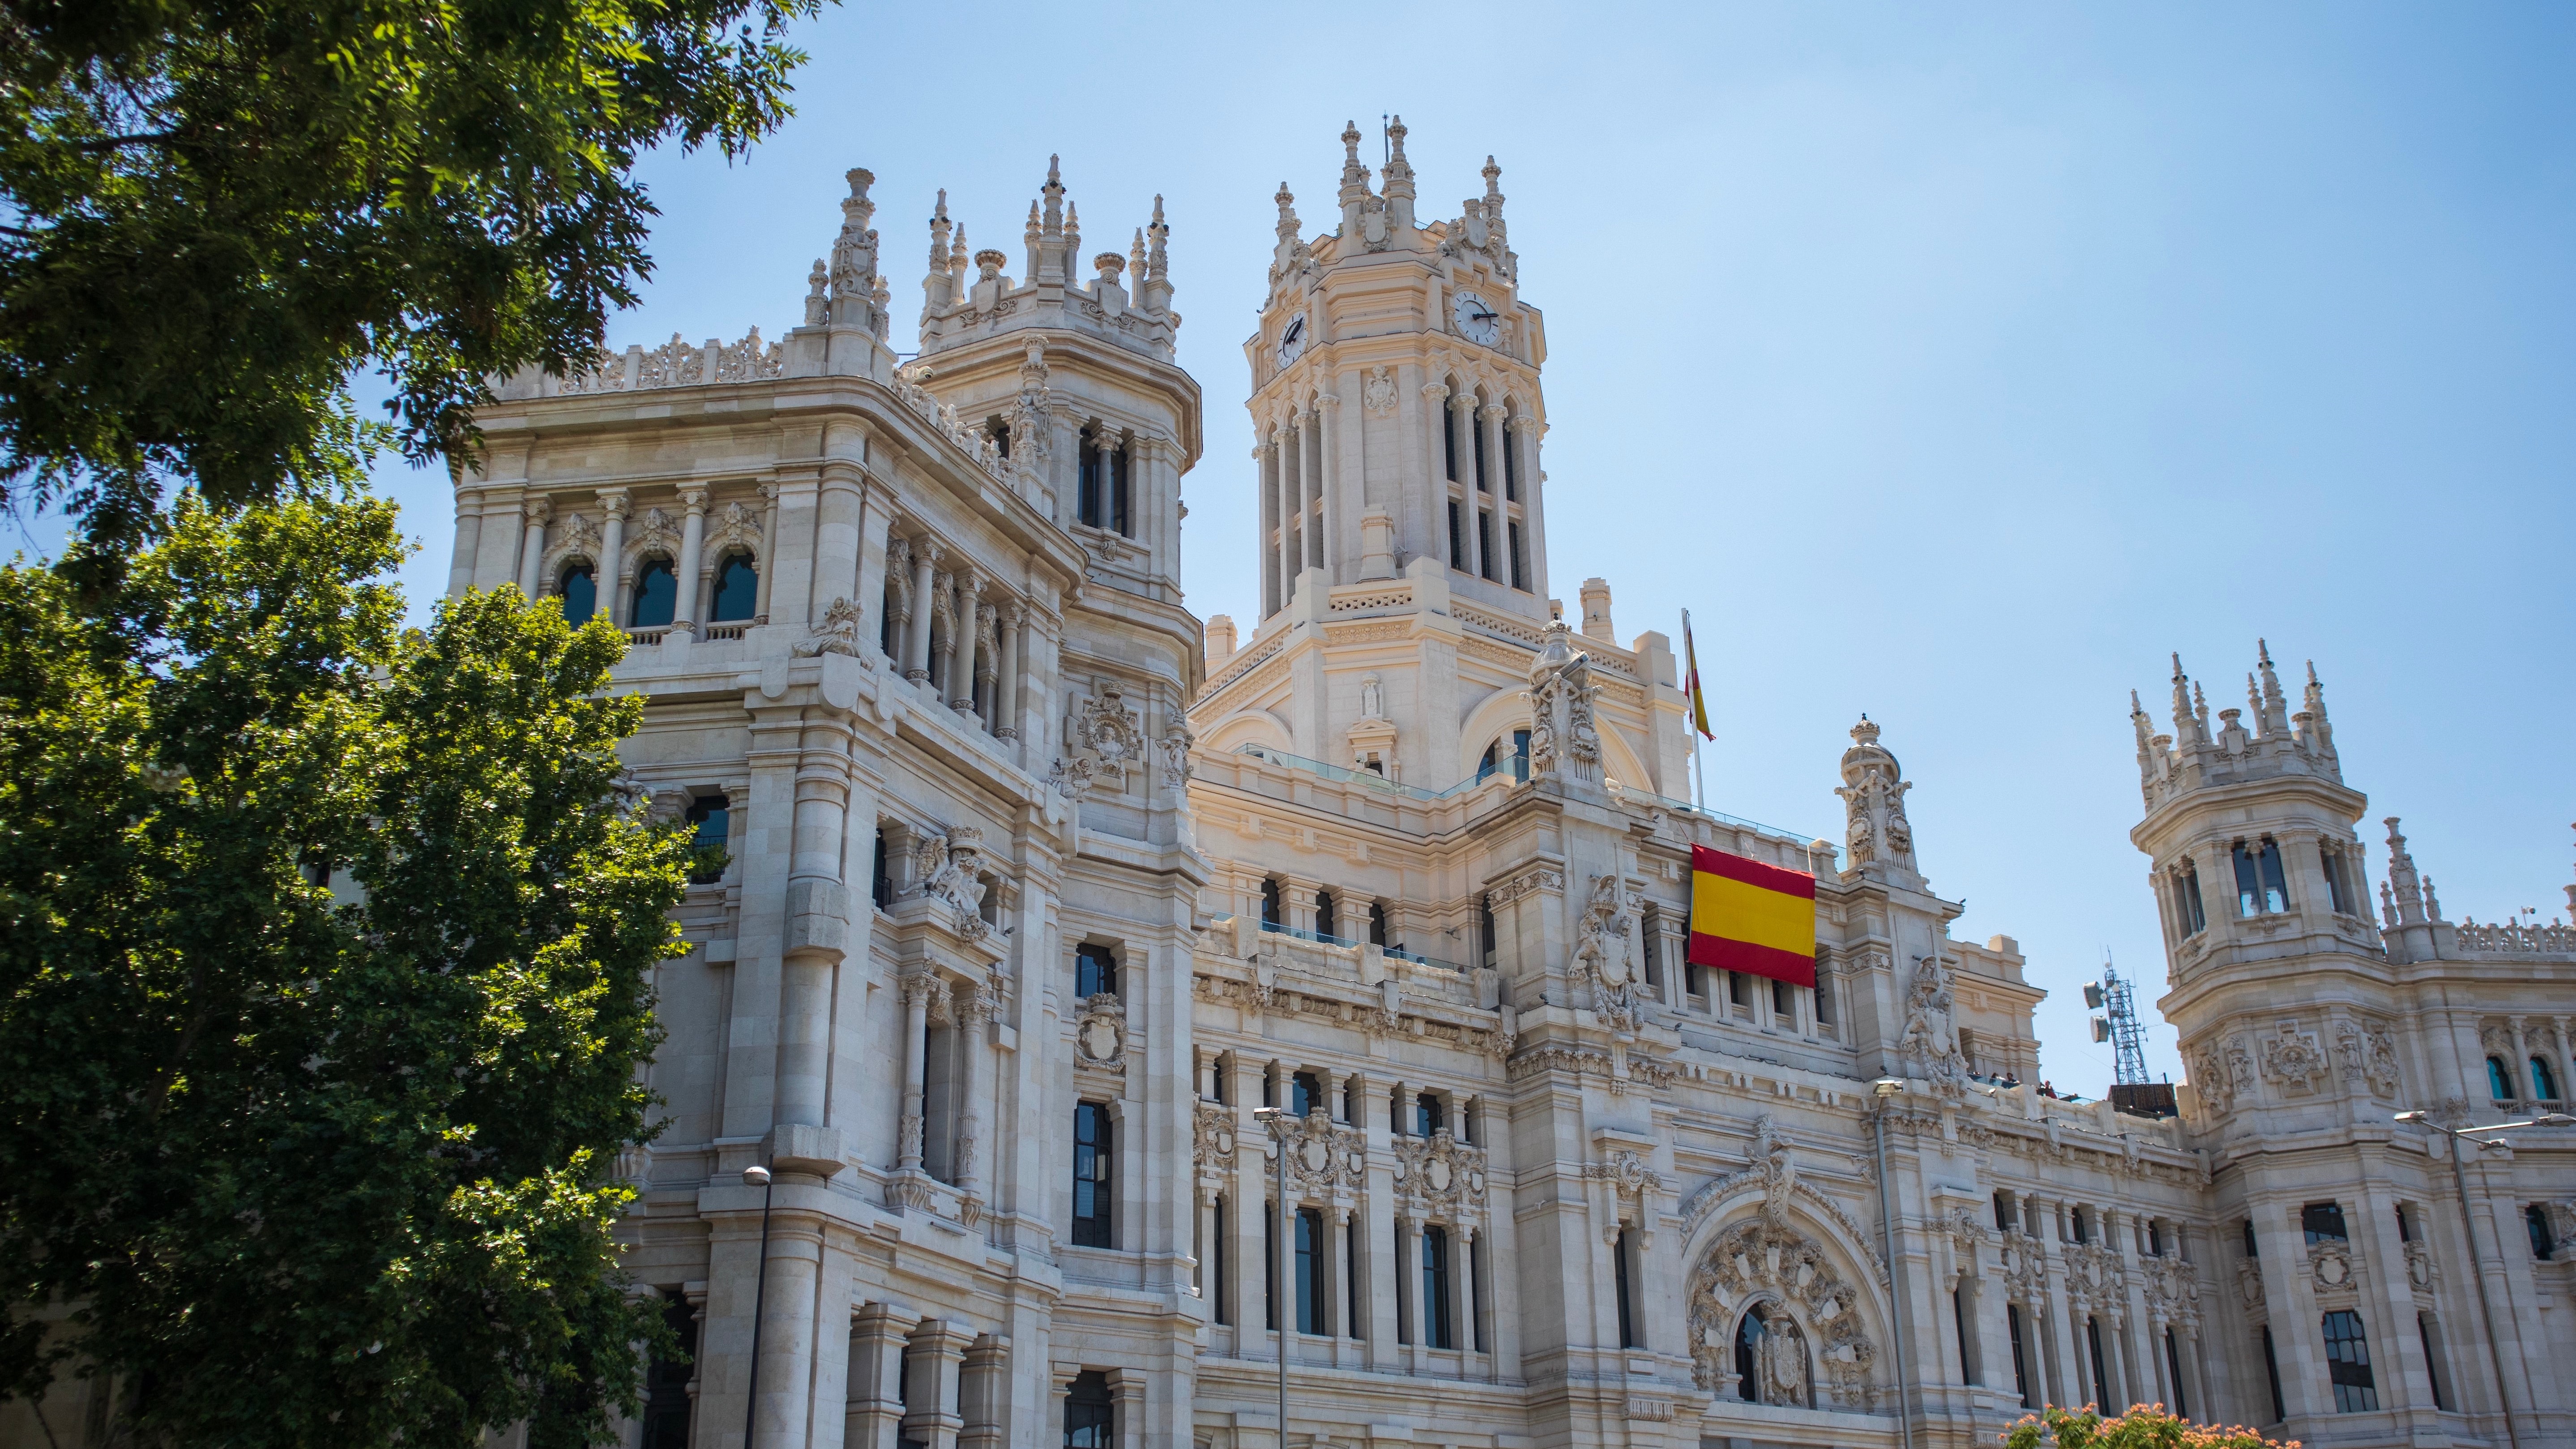 Madrid: The Ideal City for Shared Mobility?